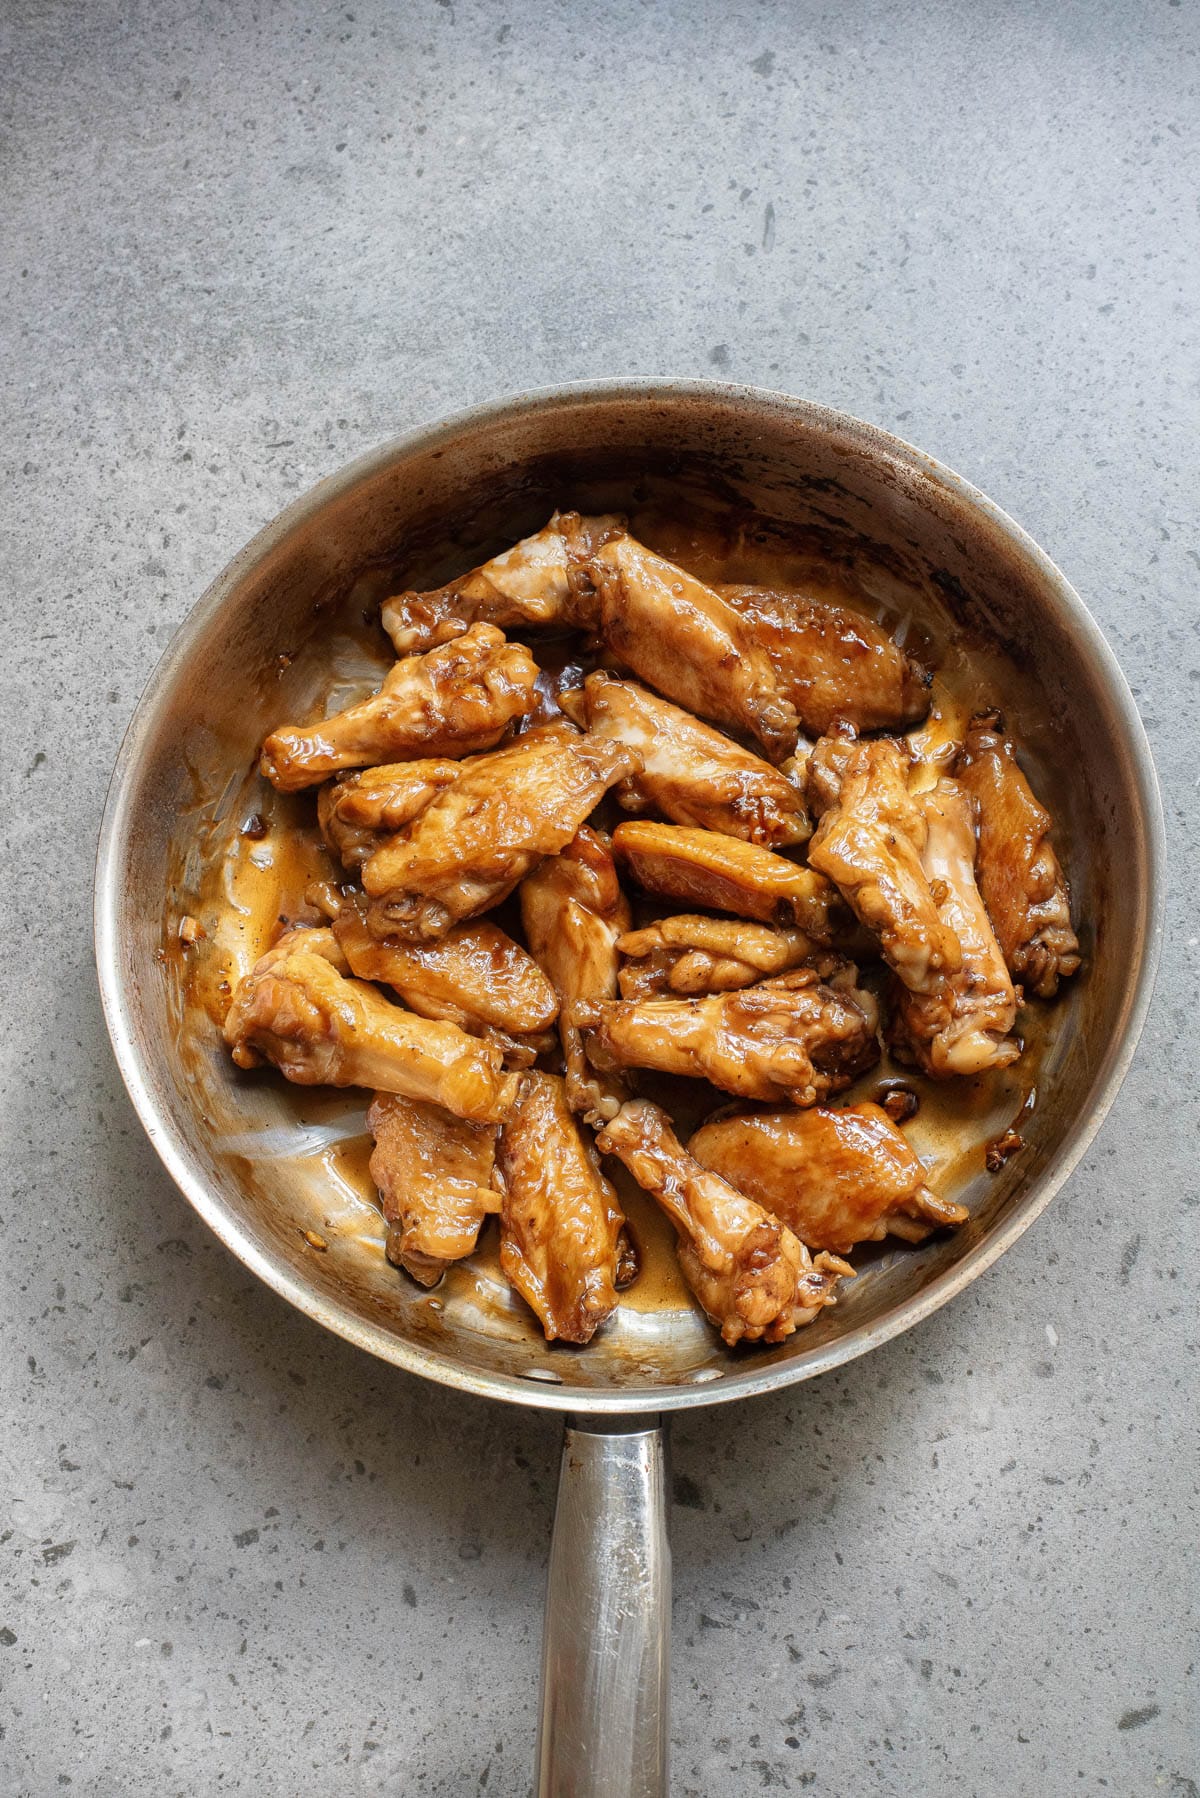 Chicken wings and sauce in a skillet.